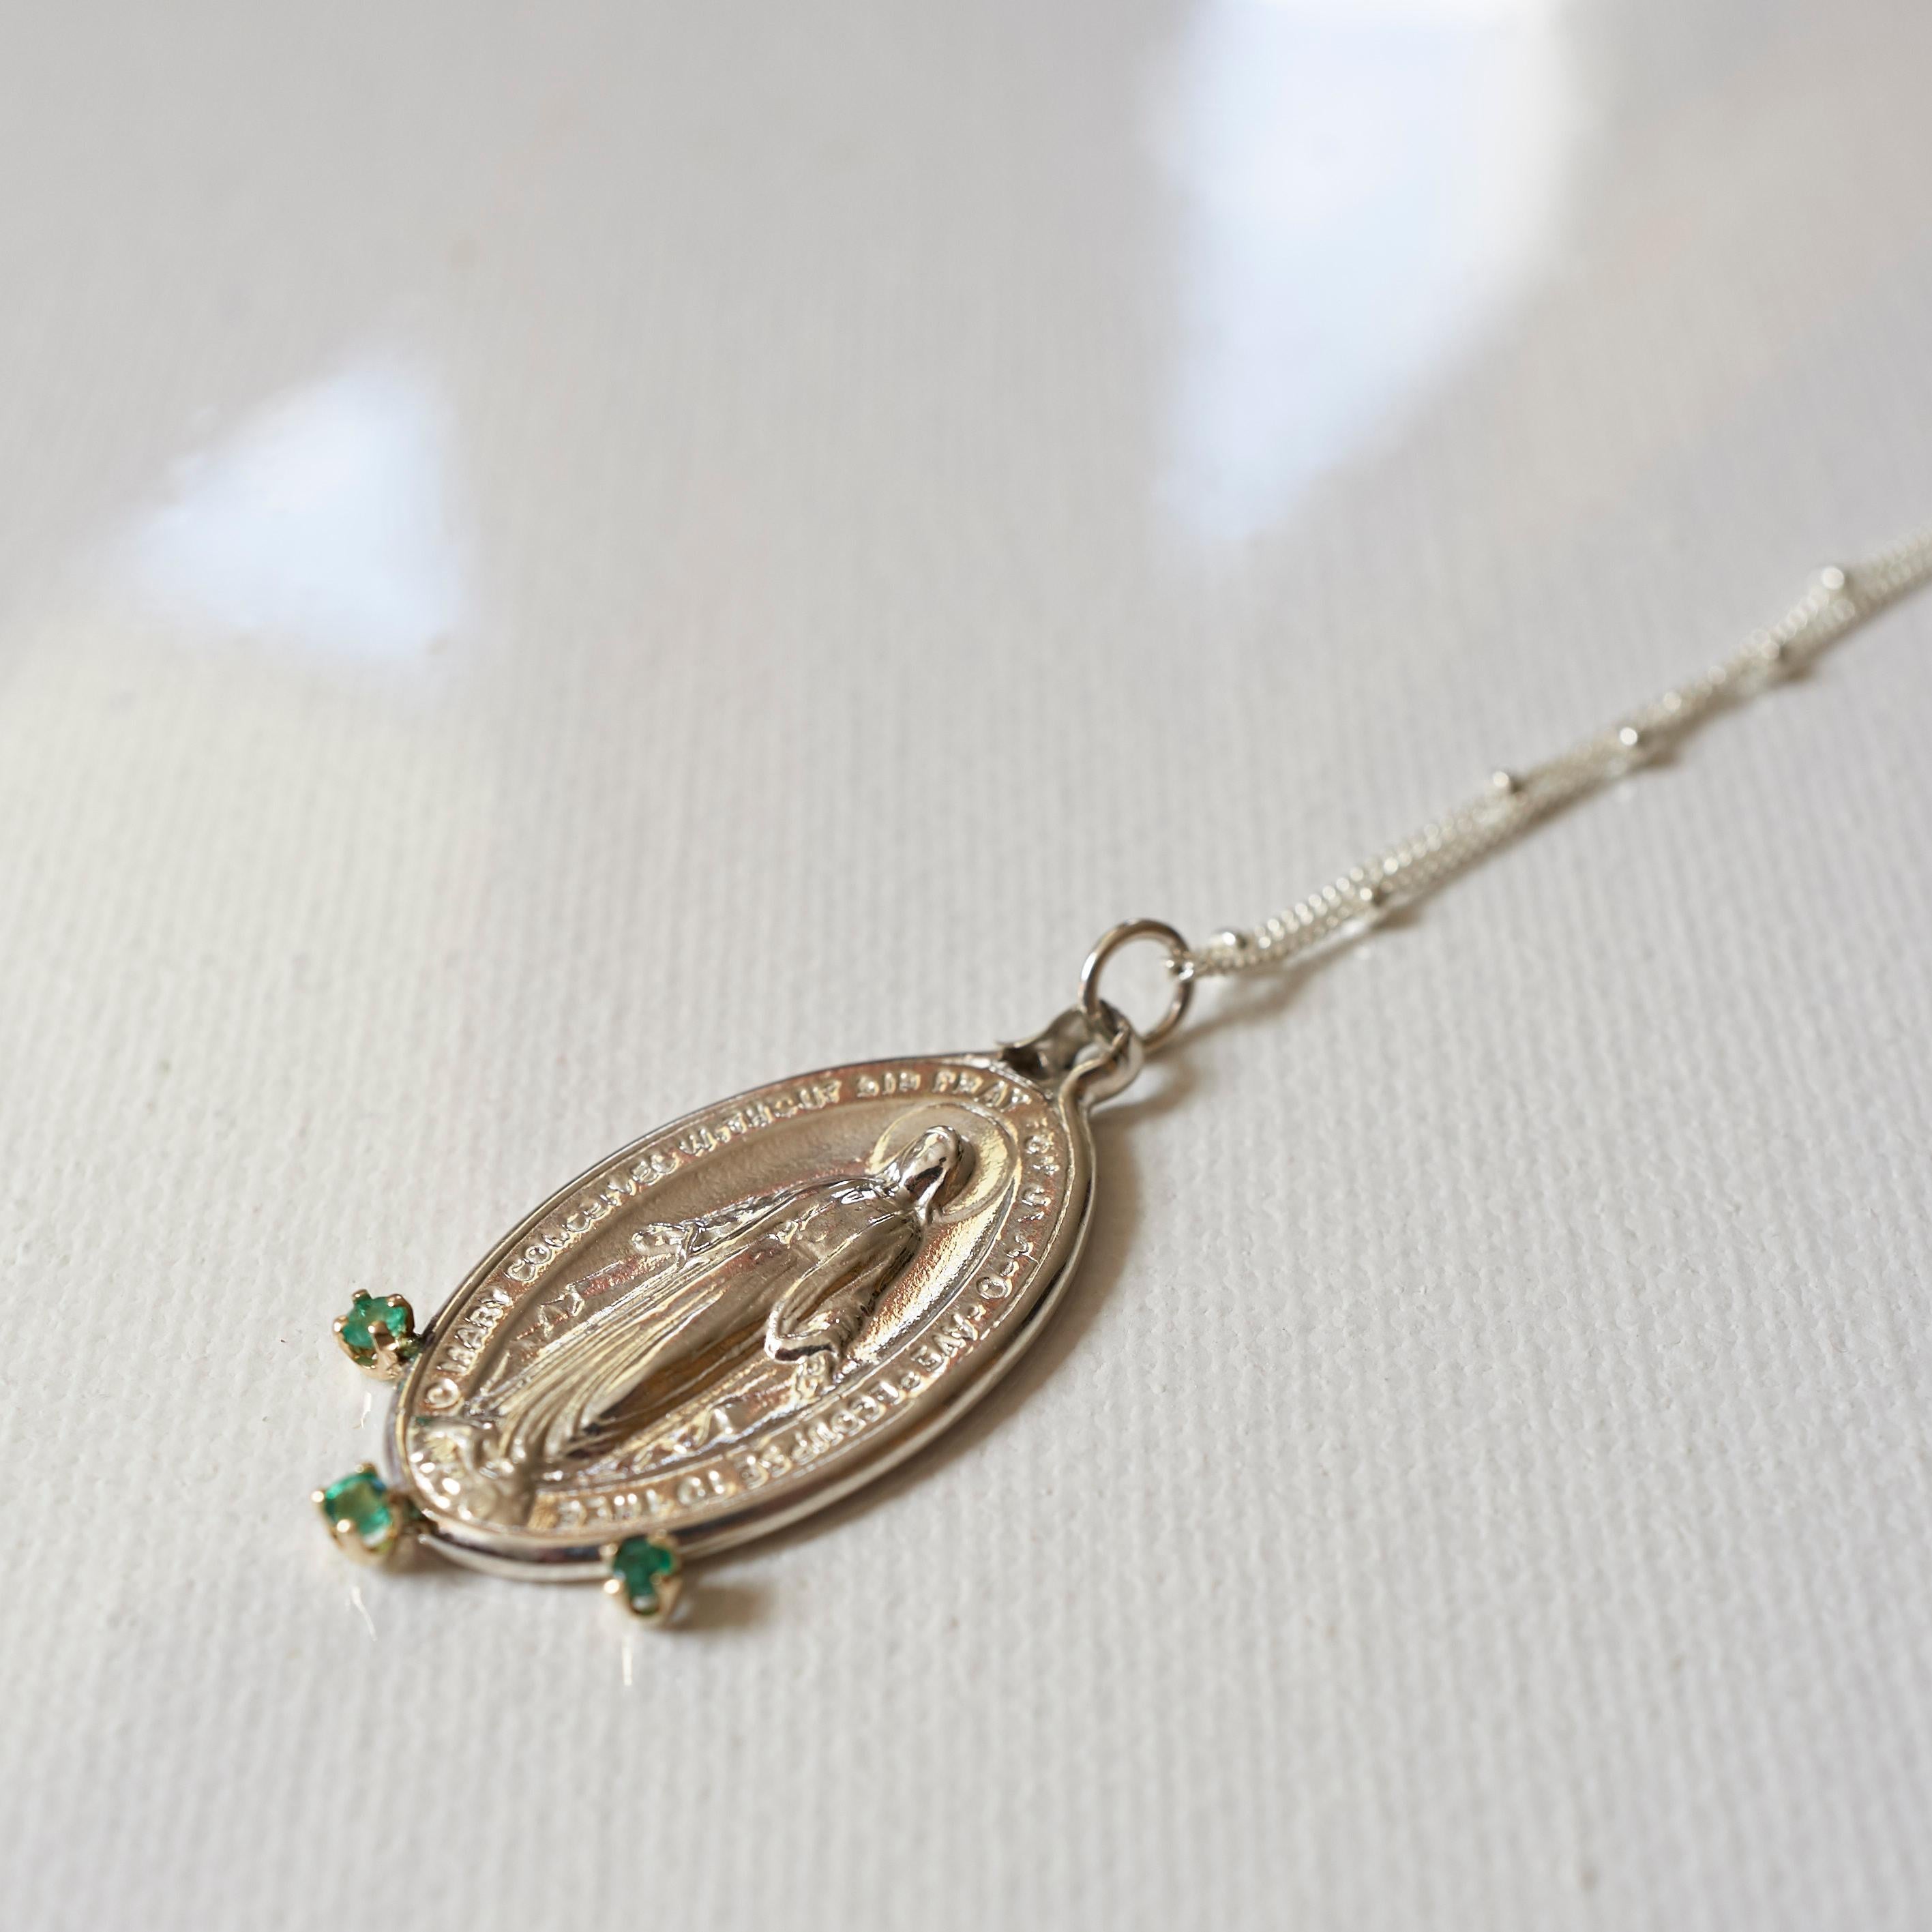 Brilliant Cut Virgin Mary Medal Oval Pendant Emeralds Silver Chain Necklace J Dauphin For Sale